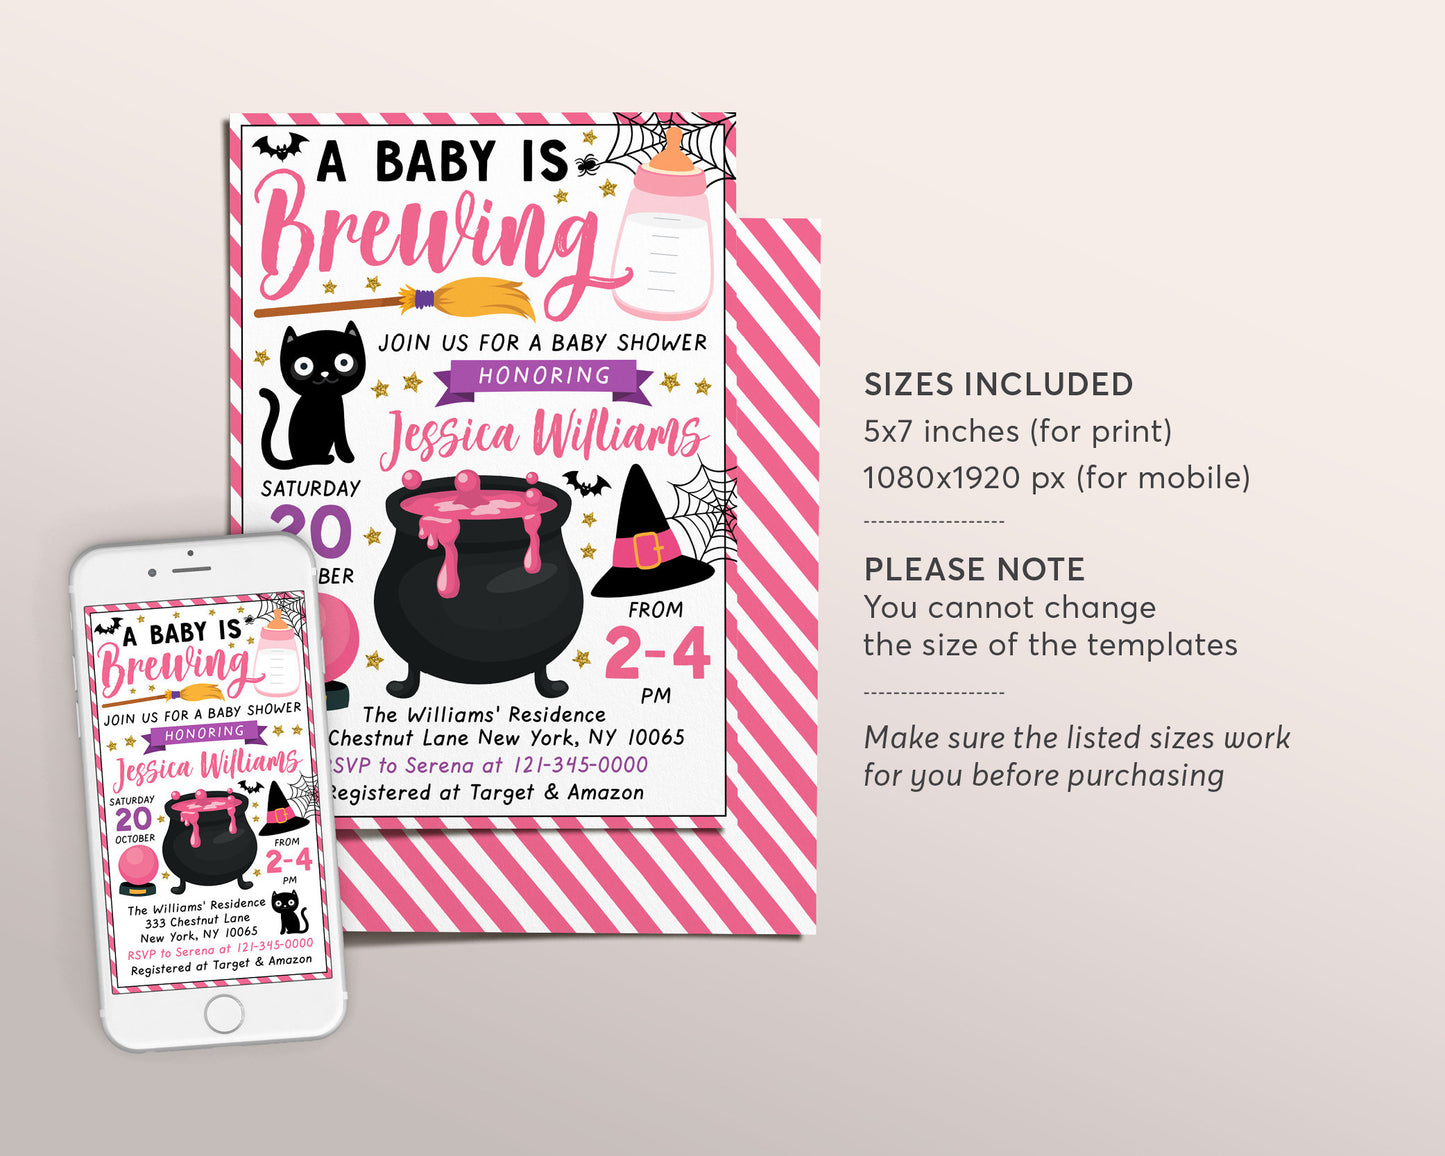 A Baby is Brewing Baby Shower Invitation Editable Template, Pink Witch Themed Girl Halloween Baby Sprinkle Invite Evite DIY, A Little Boo